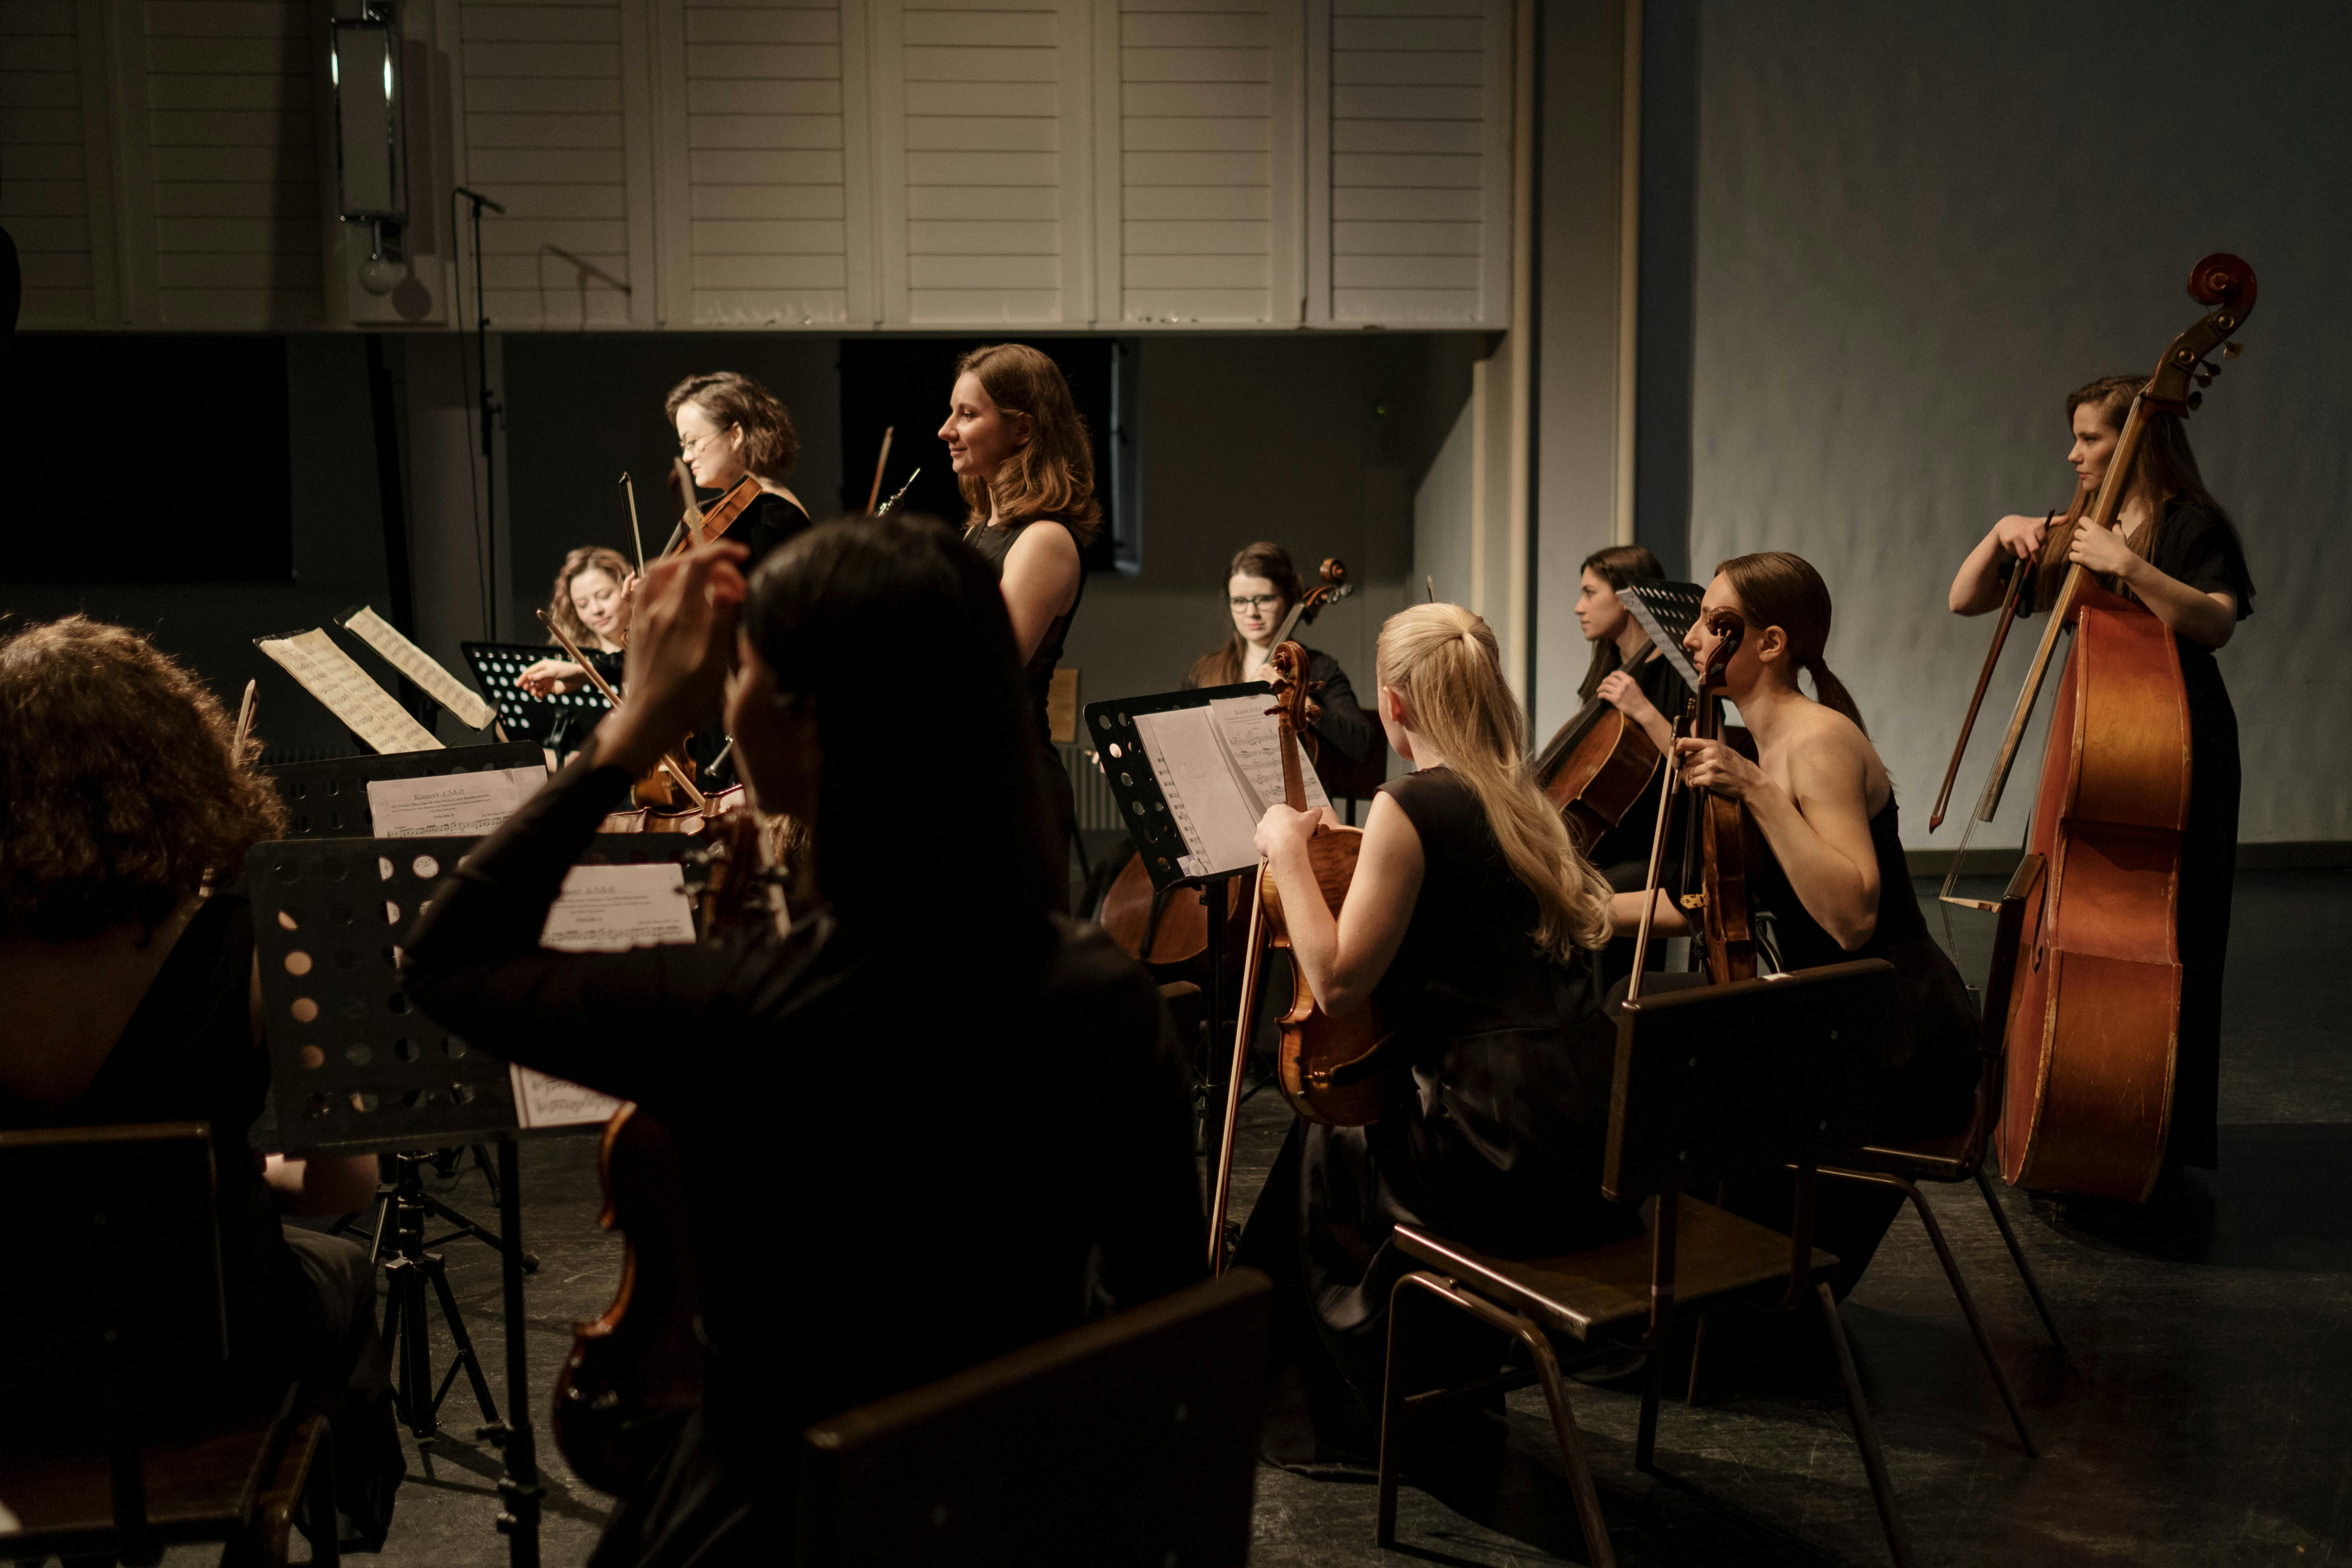 Small orchestral ensemble of approximately 10 women, wearing all black clothing and holding various classical instruments 